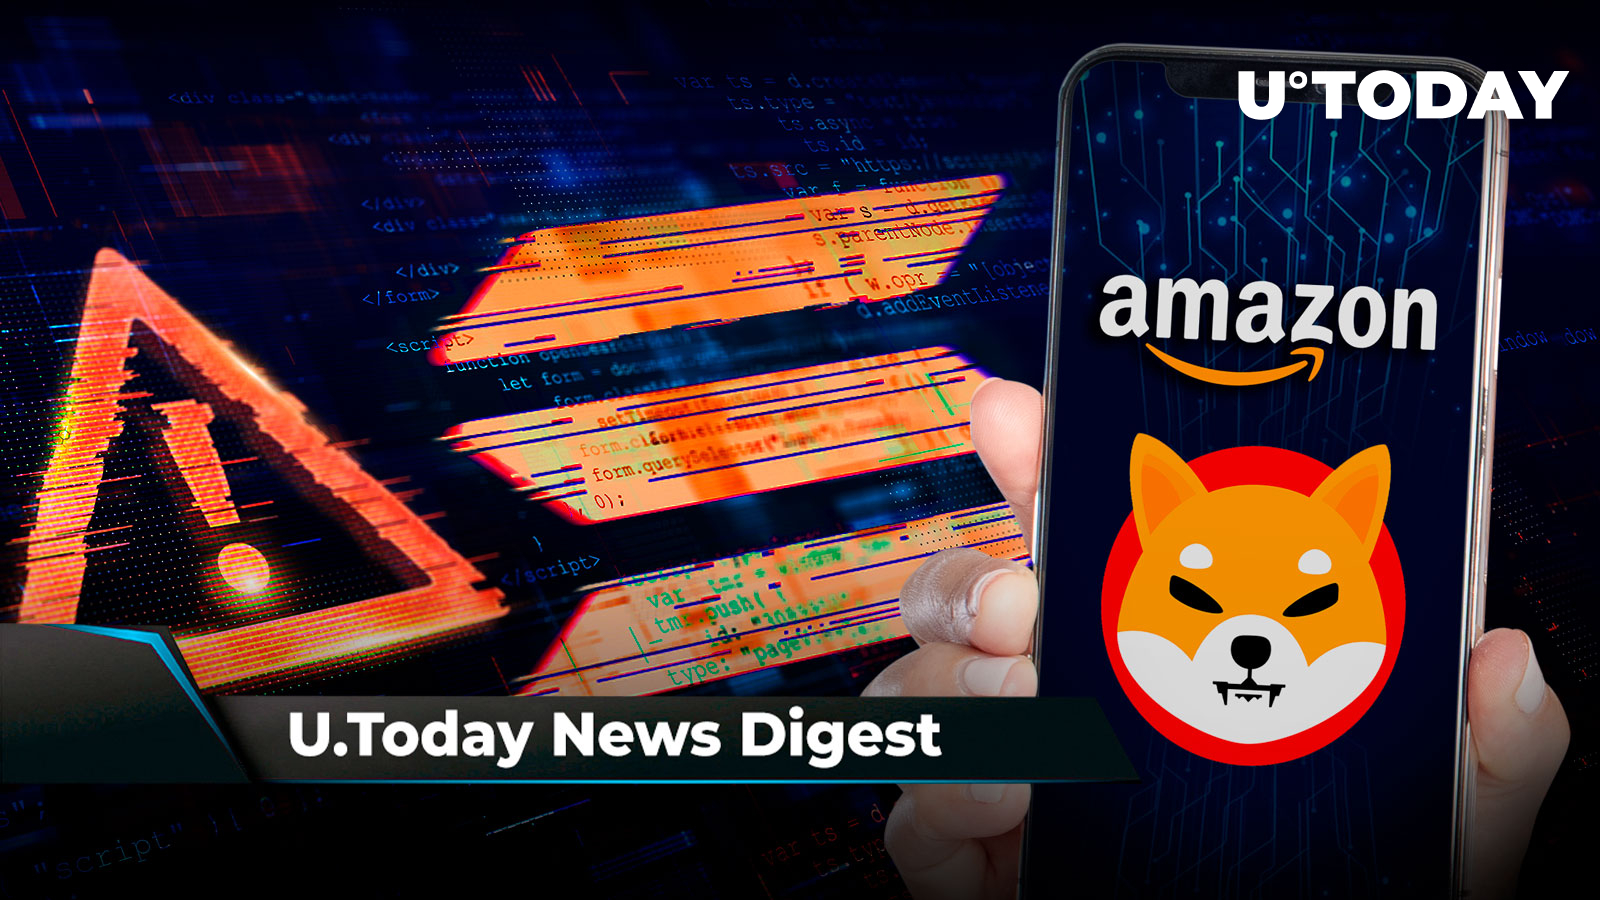 Amazon Called SHIB “Solid Daily Burner”, Cardano Founder “Facepalms” Solana Hack, Japan’s Bitbank Now Supports DOGE and DOT